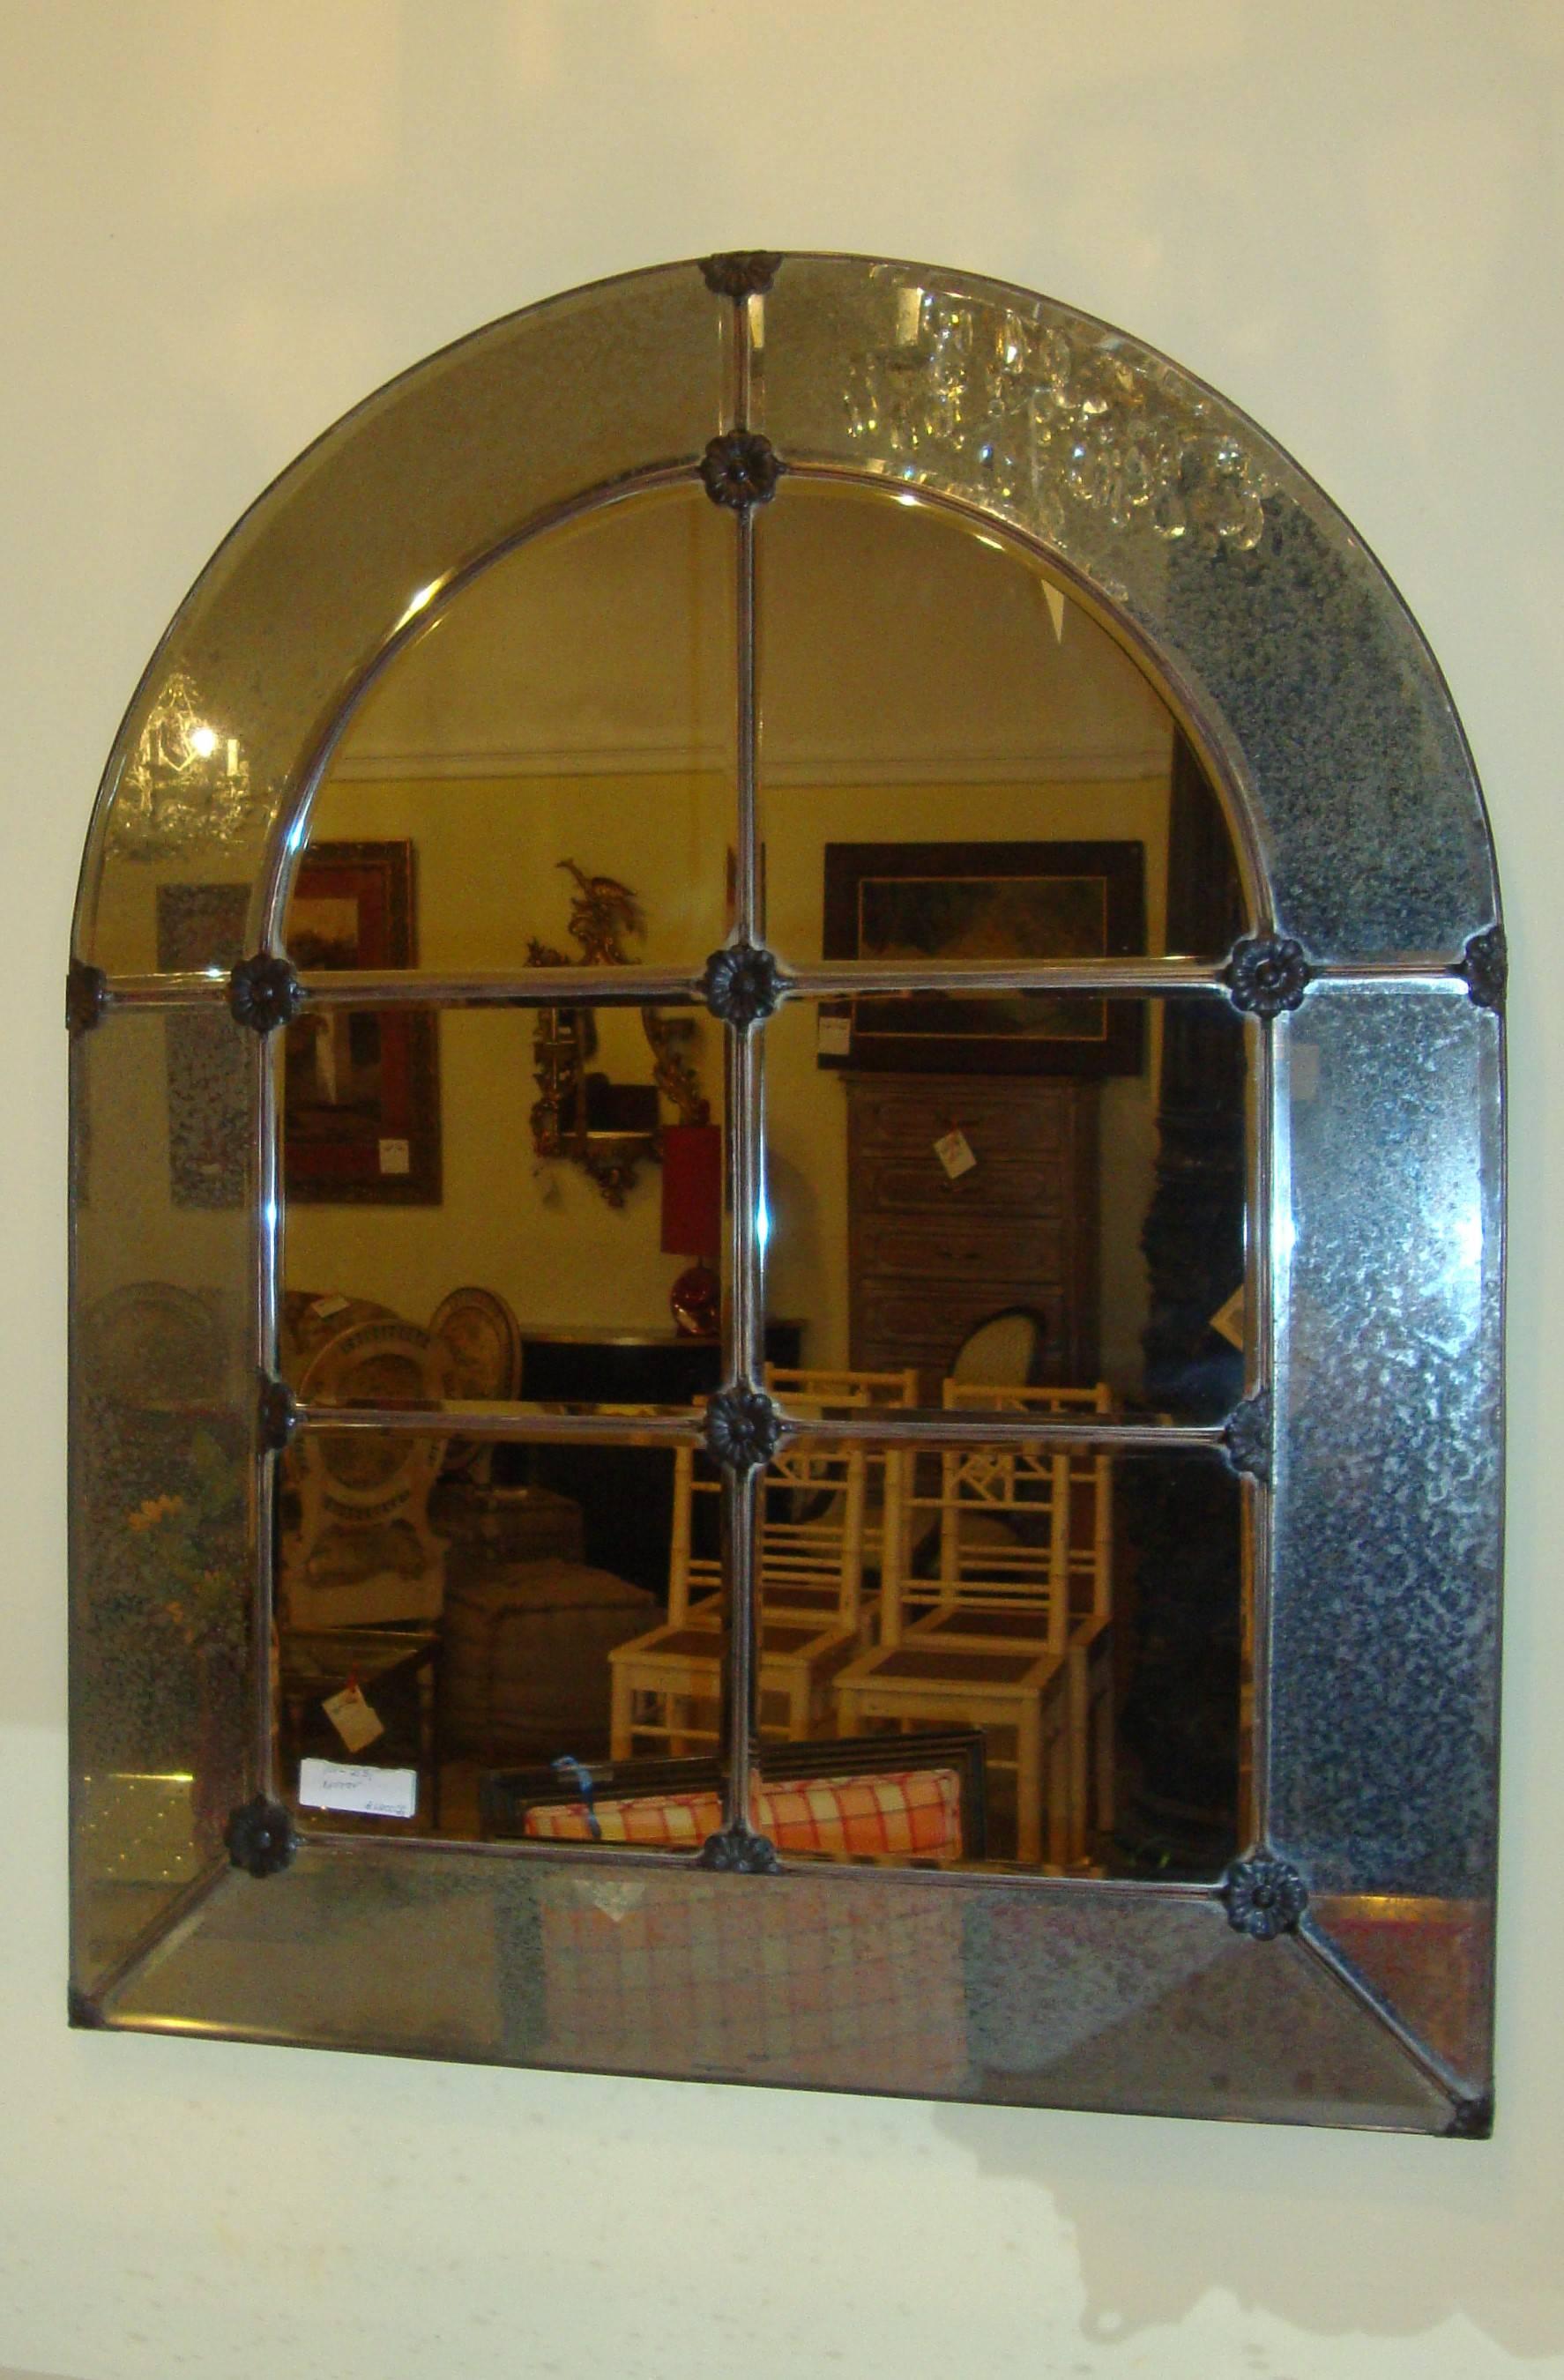 A Hollywood Regency style wall or console mirror. The clean center having six panels framed by a distressed outer border with rosettes.